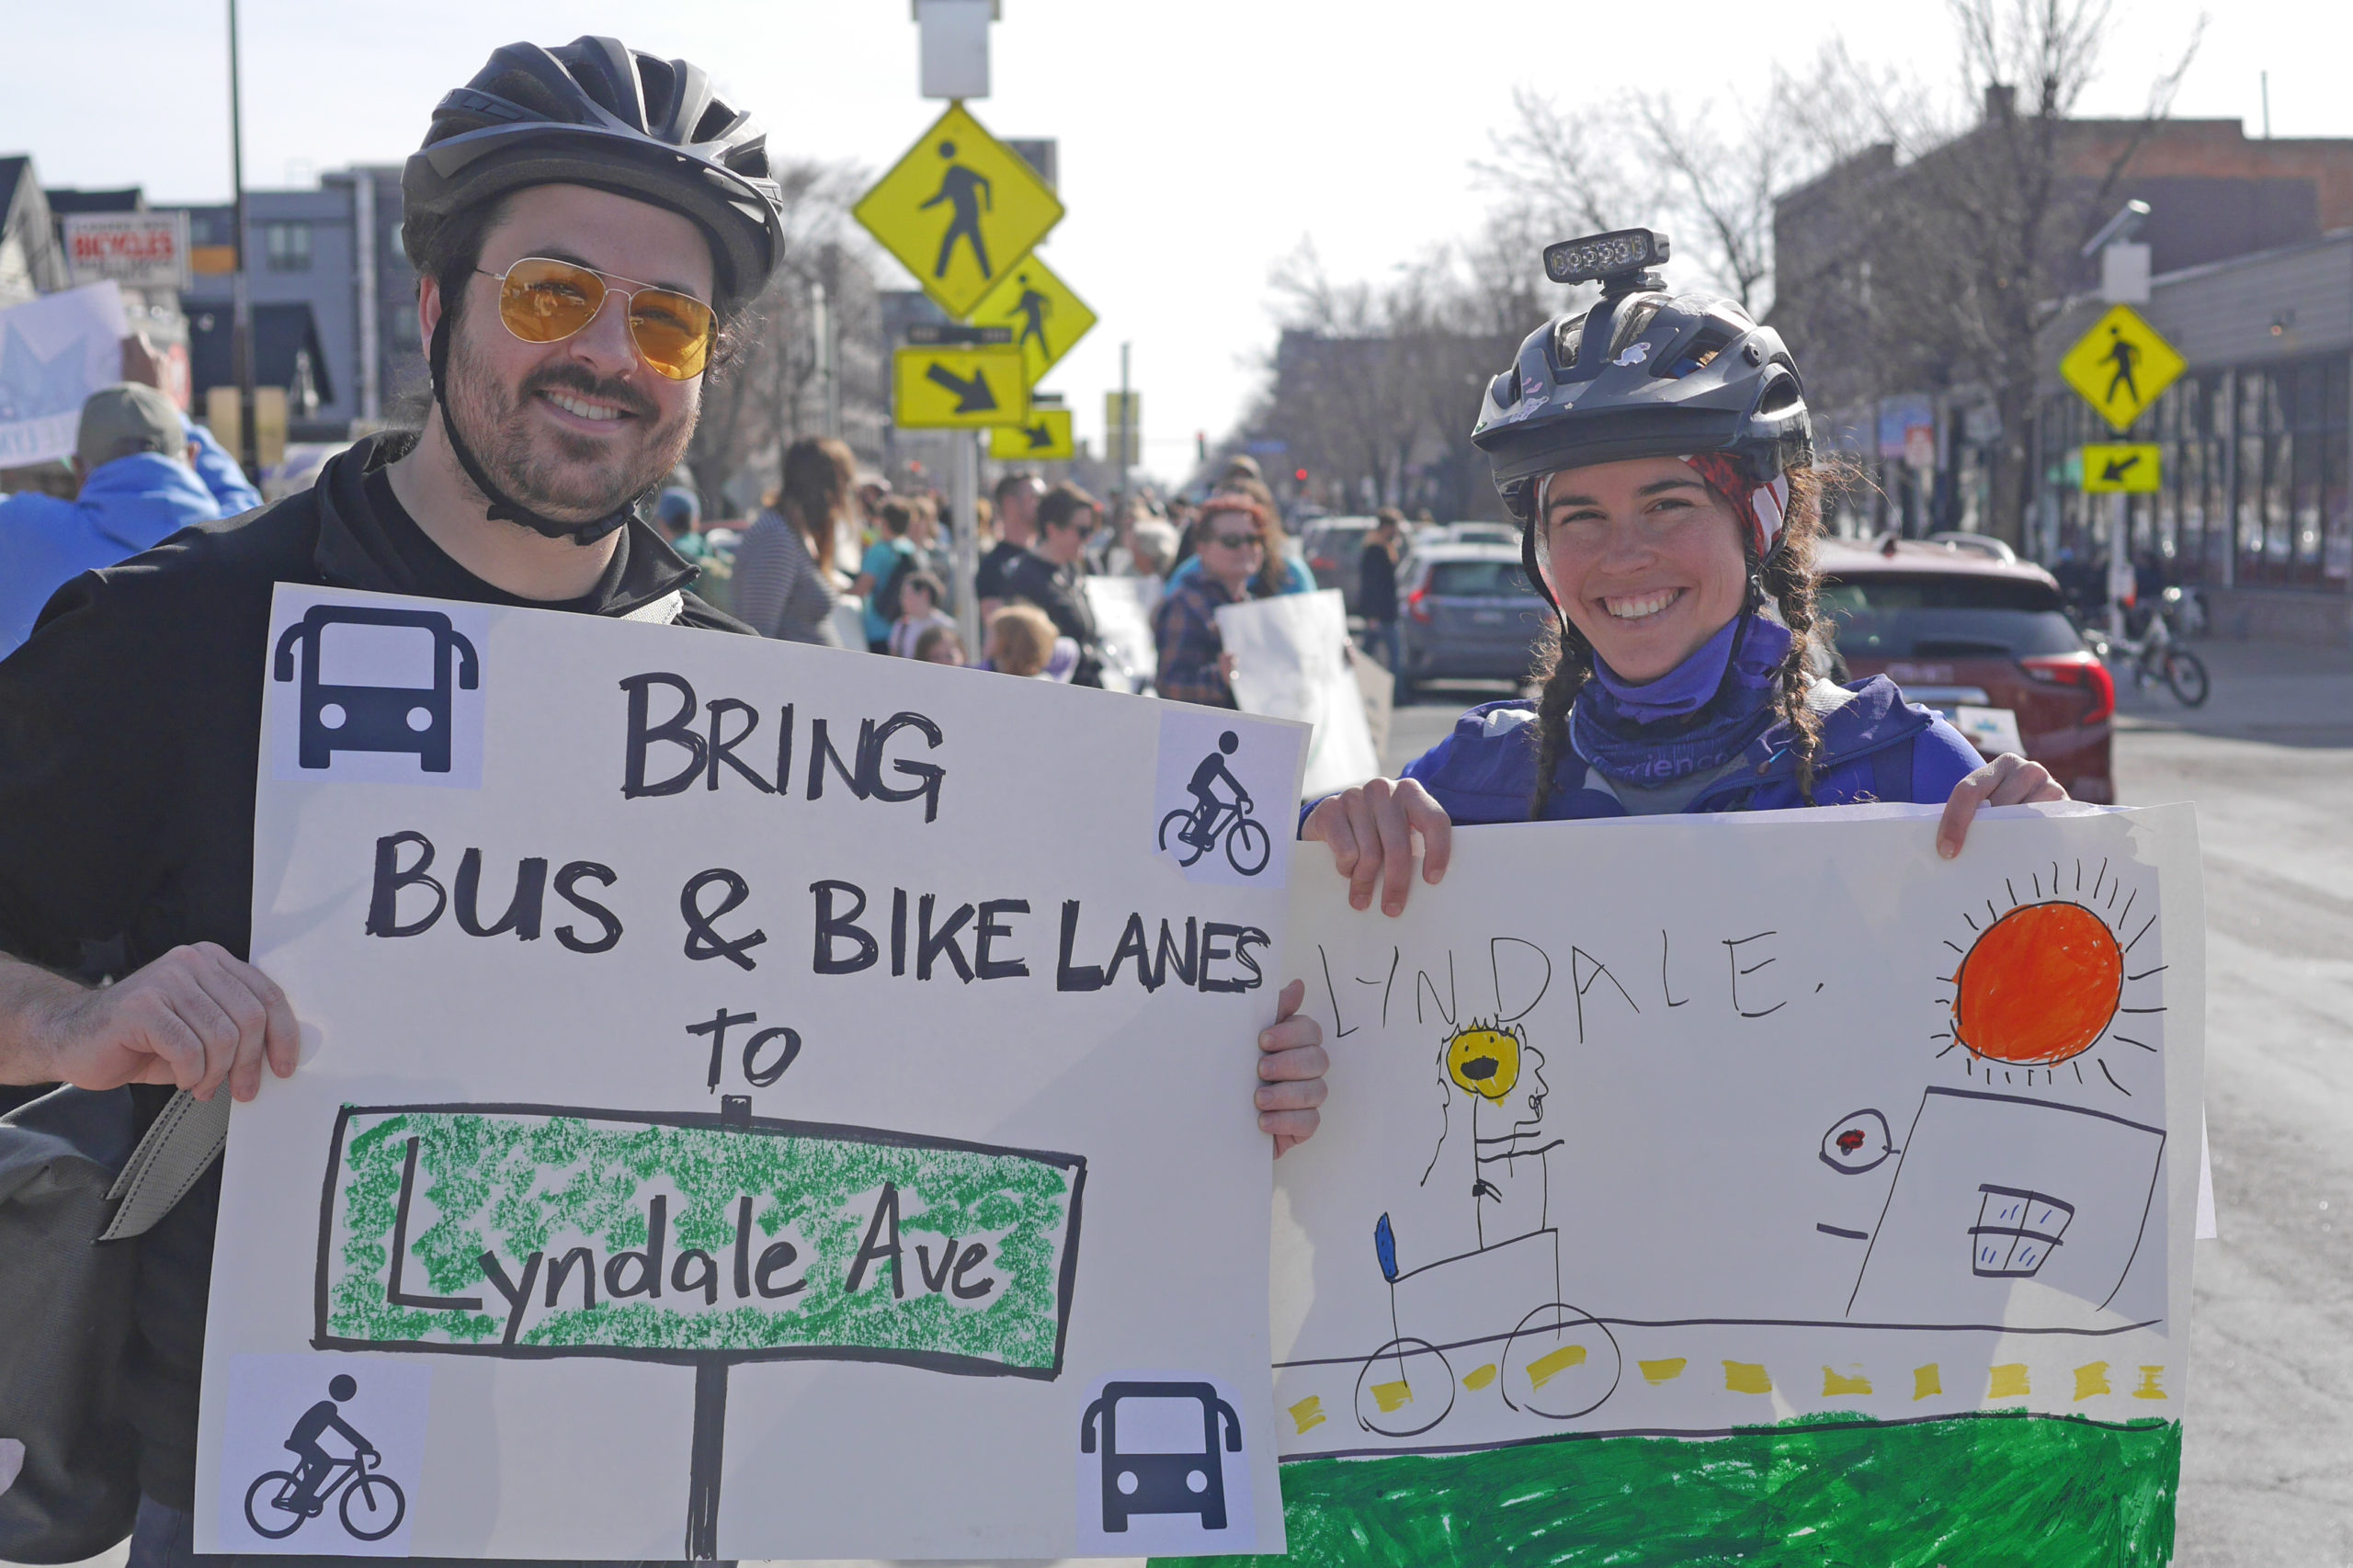 Community members in bike helmets at the Livable Lyndale rally in Minneapolis. Their signs say "Bring bus and bike lanes to Lyndale Ave" and a drawing of biking in a bike lane. A crowd of people at the rally is visible in the background.